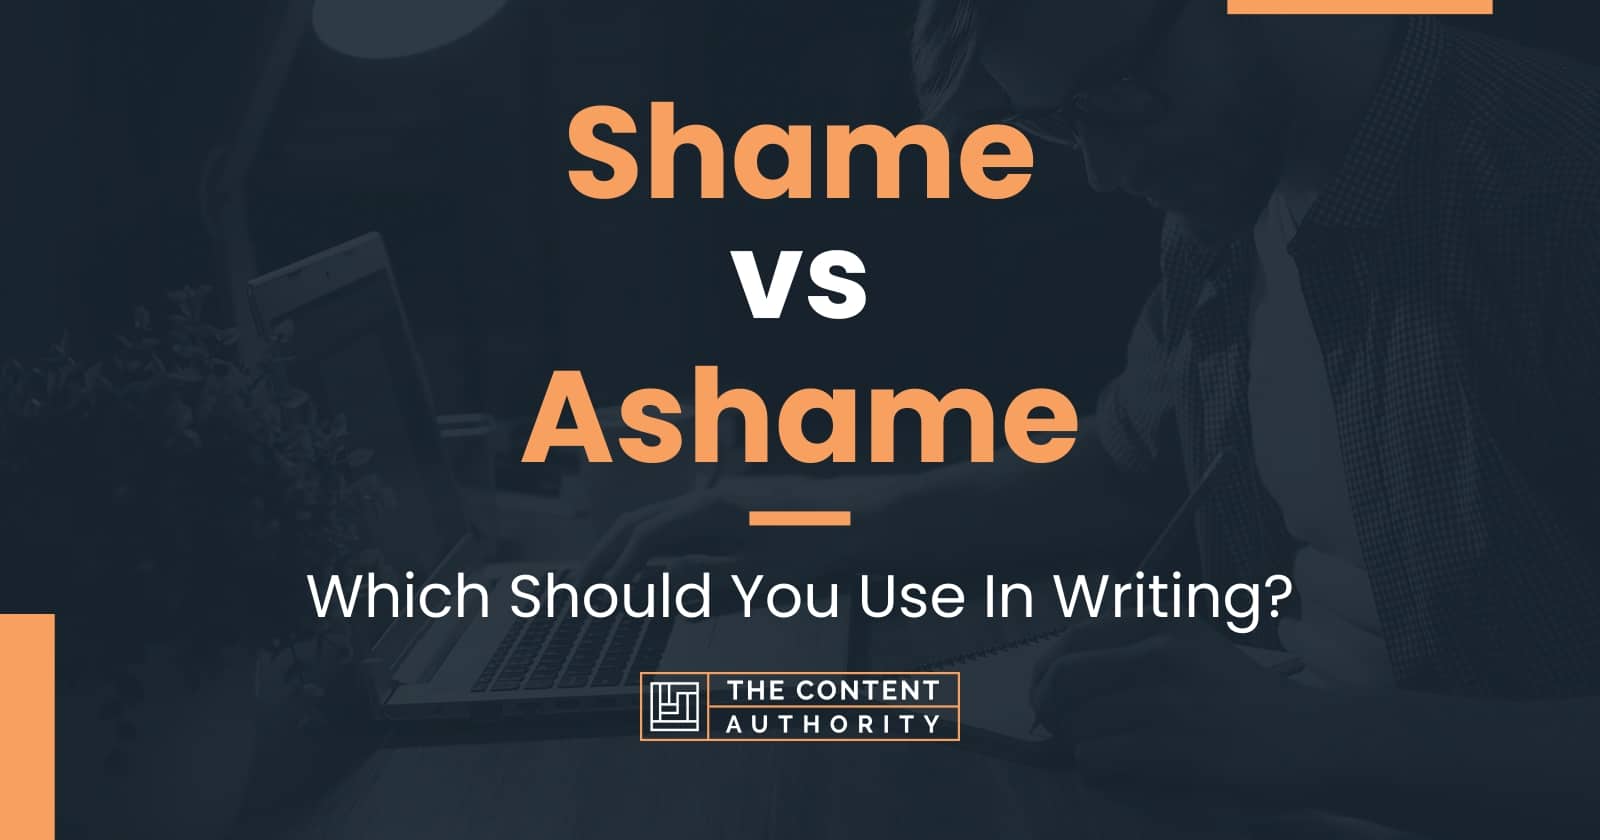 Shame vs Ashame: Which Should You Use In Writing?